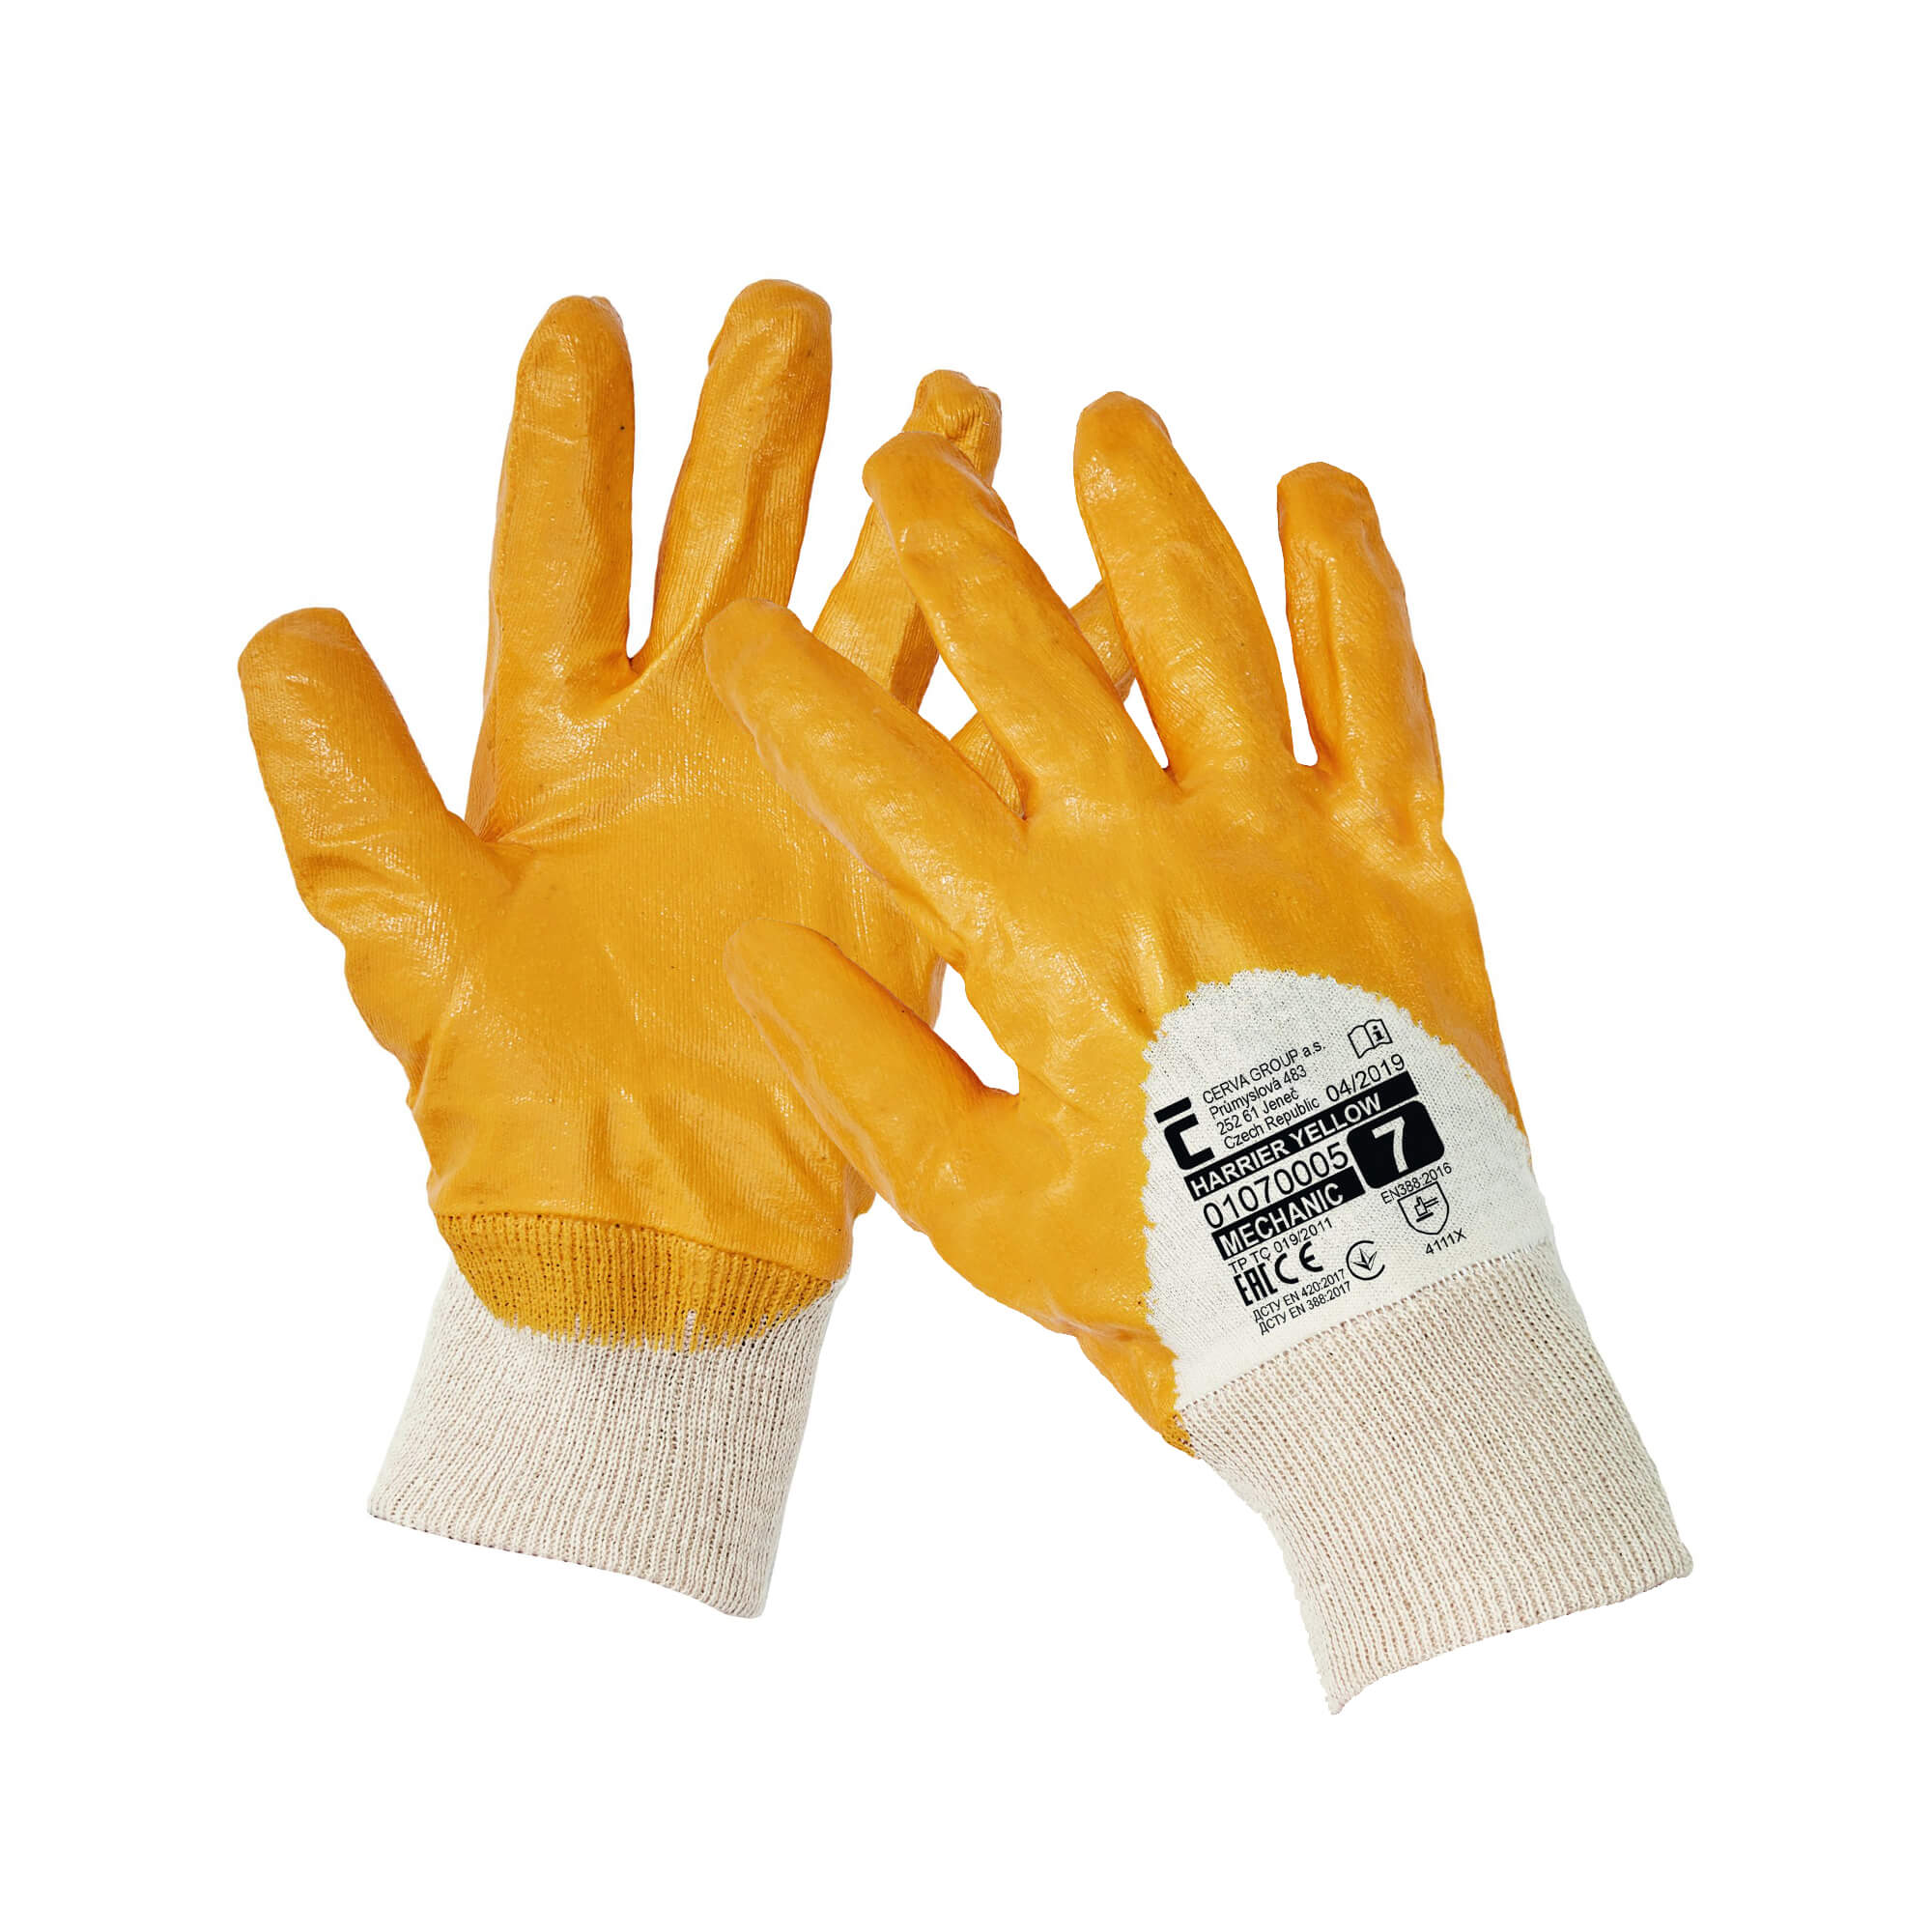 Protective work gloves Harrier Yellow